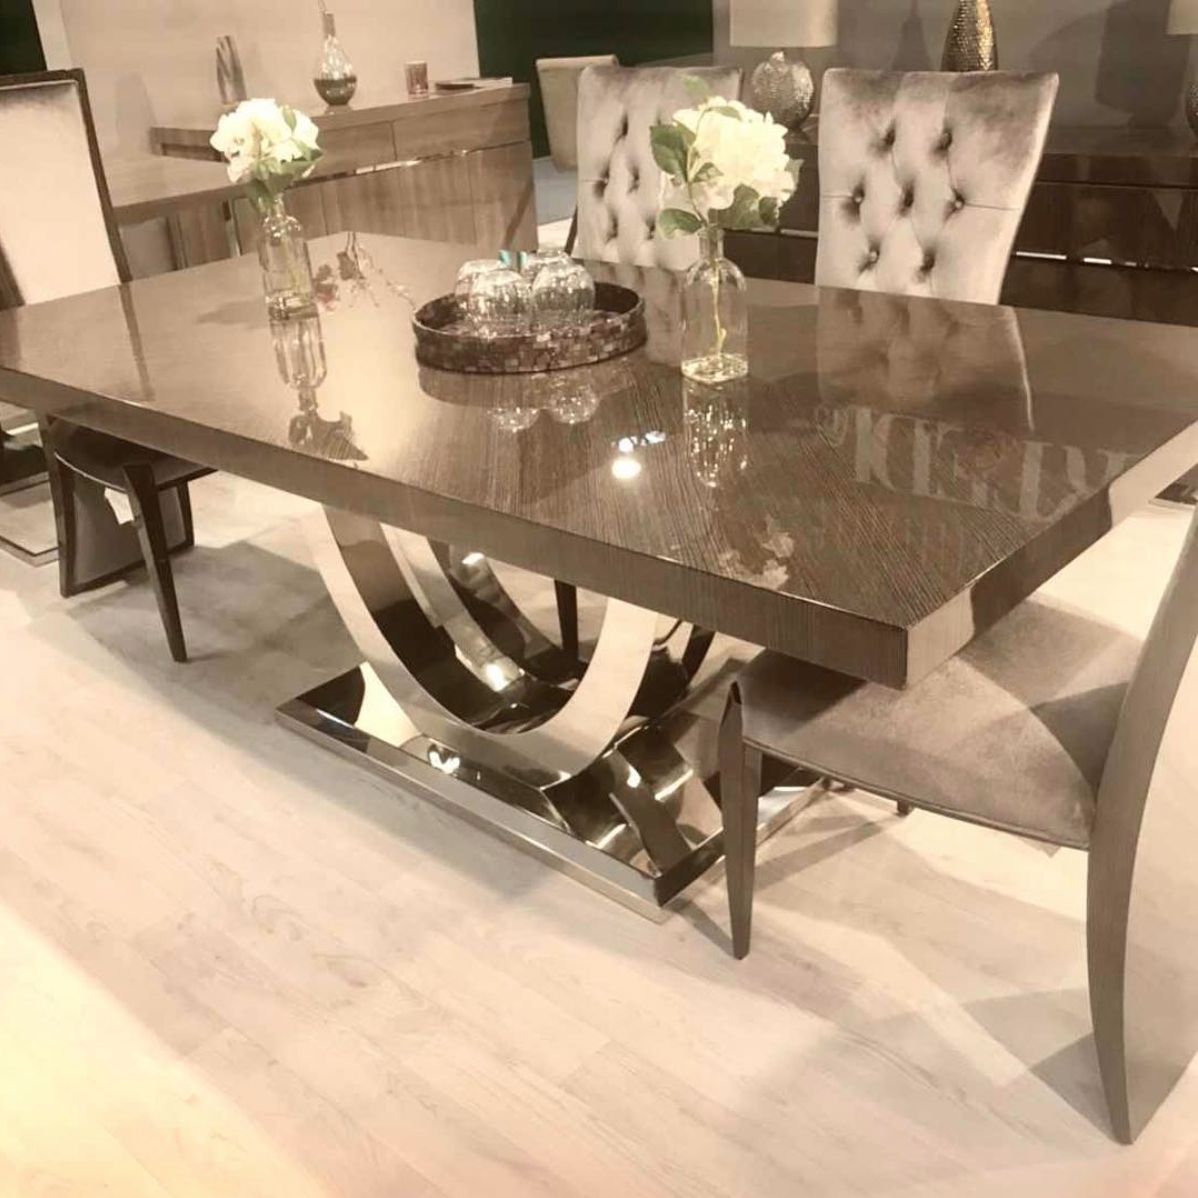 Most Recent High Gloss Dining Table With Chrome Base With Gloss Dining Tables (View 1 of 25)